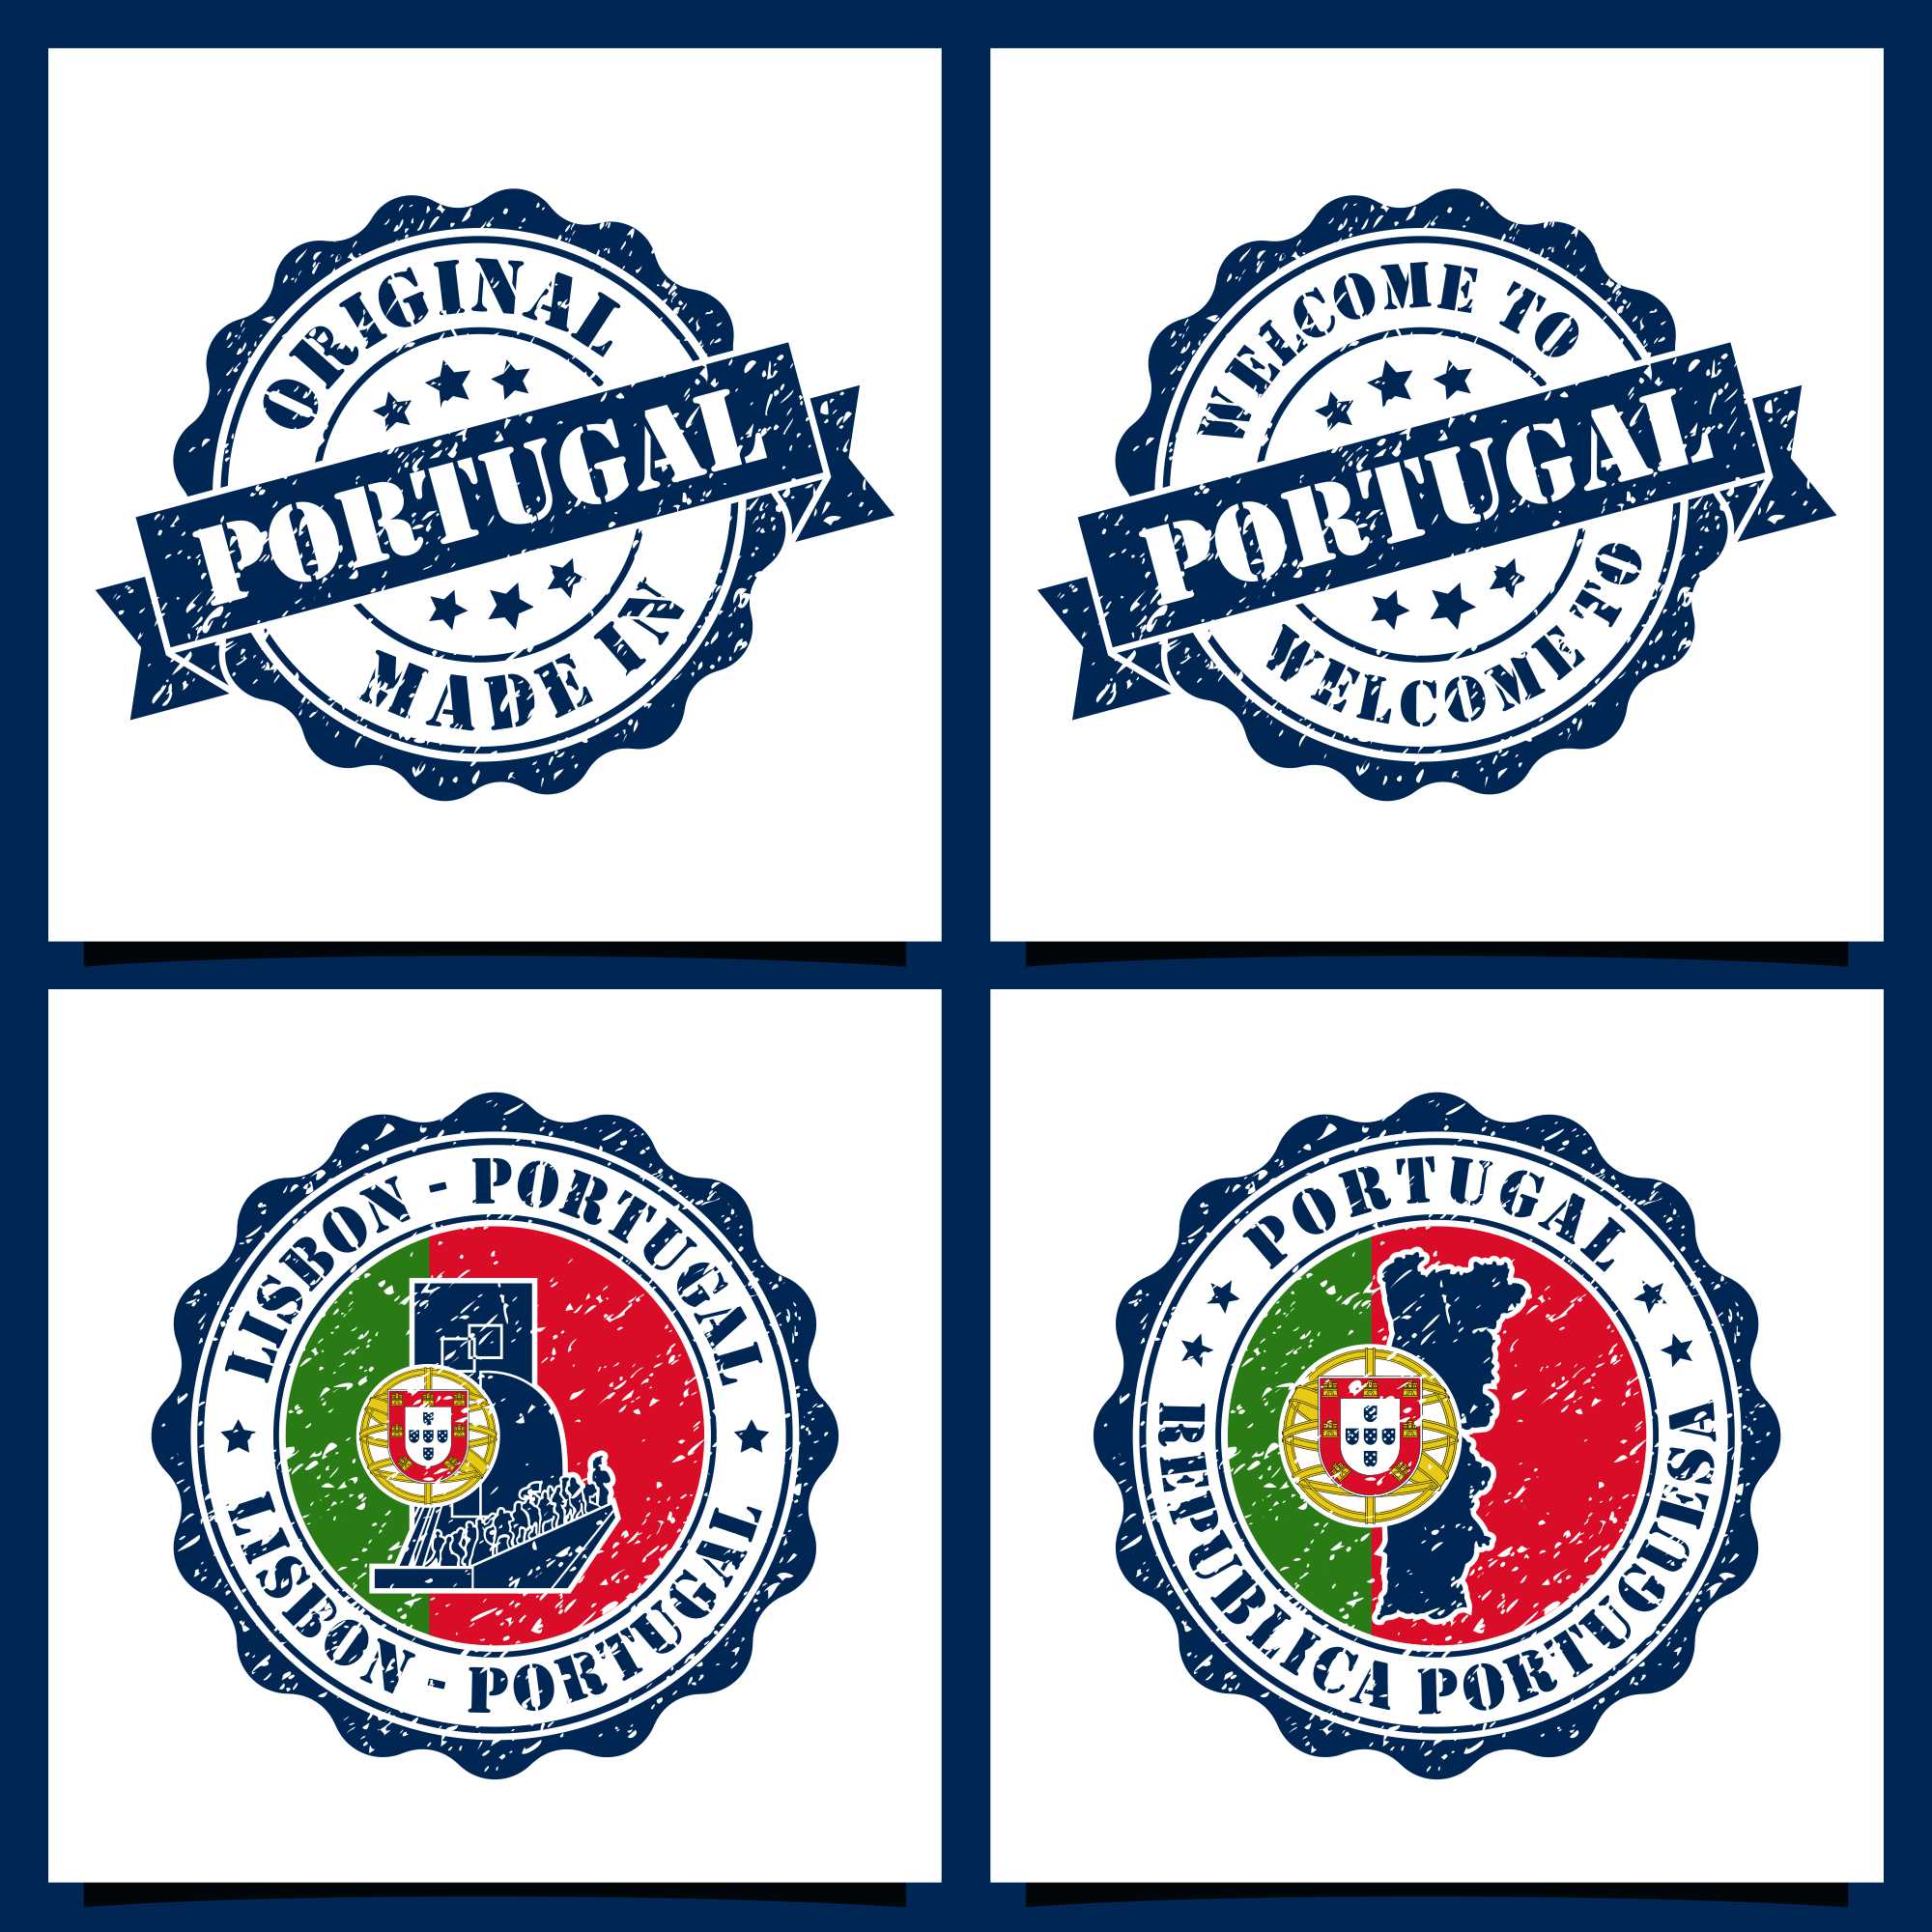 Welcome to lisbon portugal vector stamps logo collection - $4 cover image.